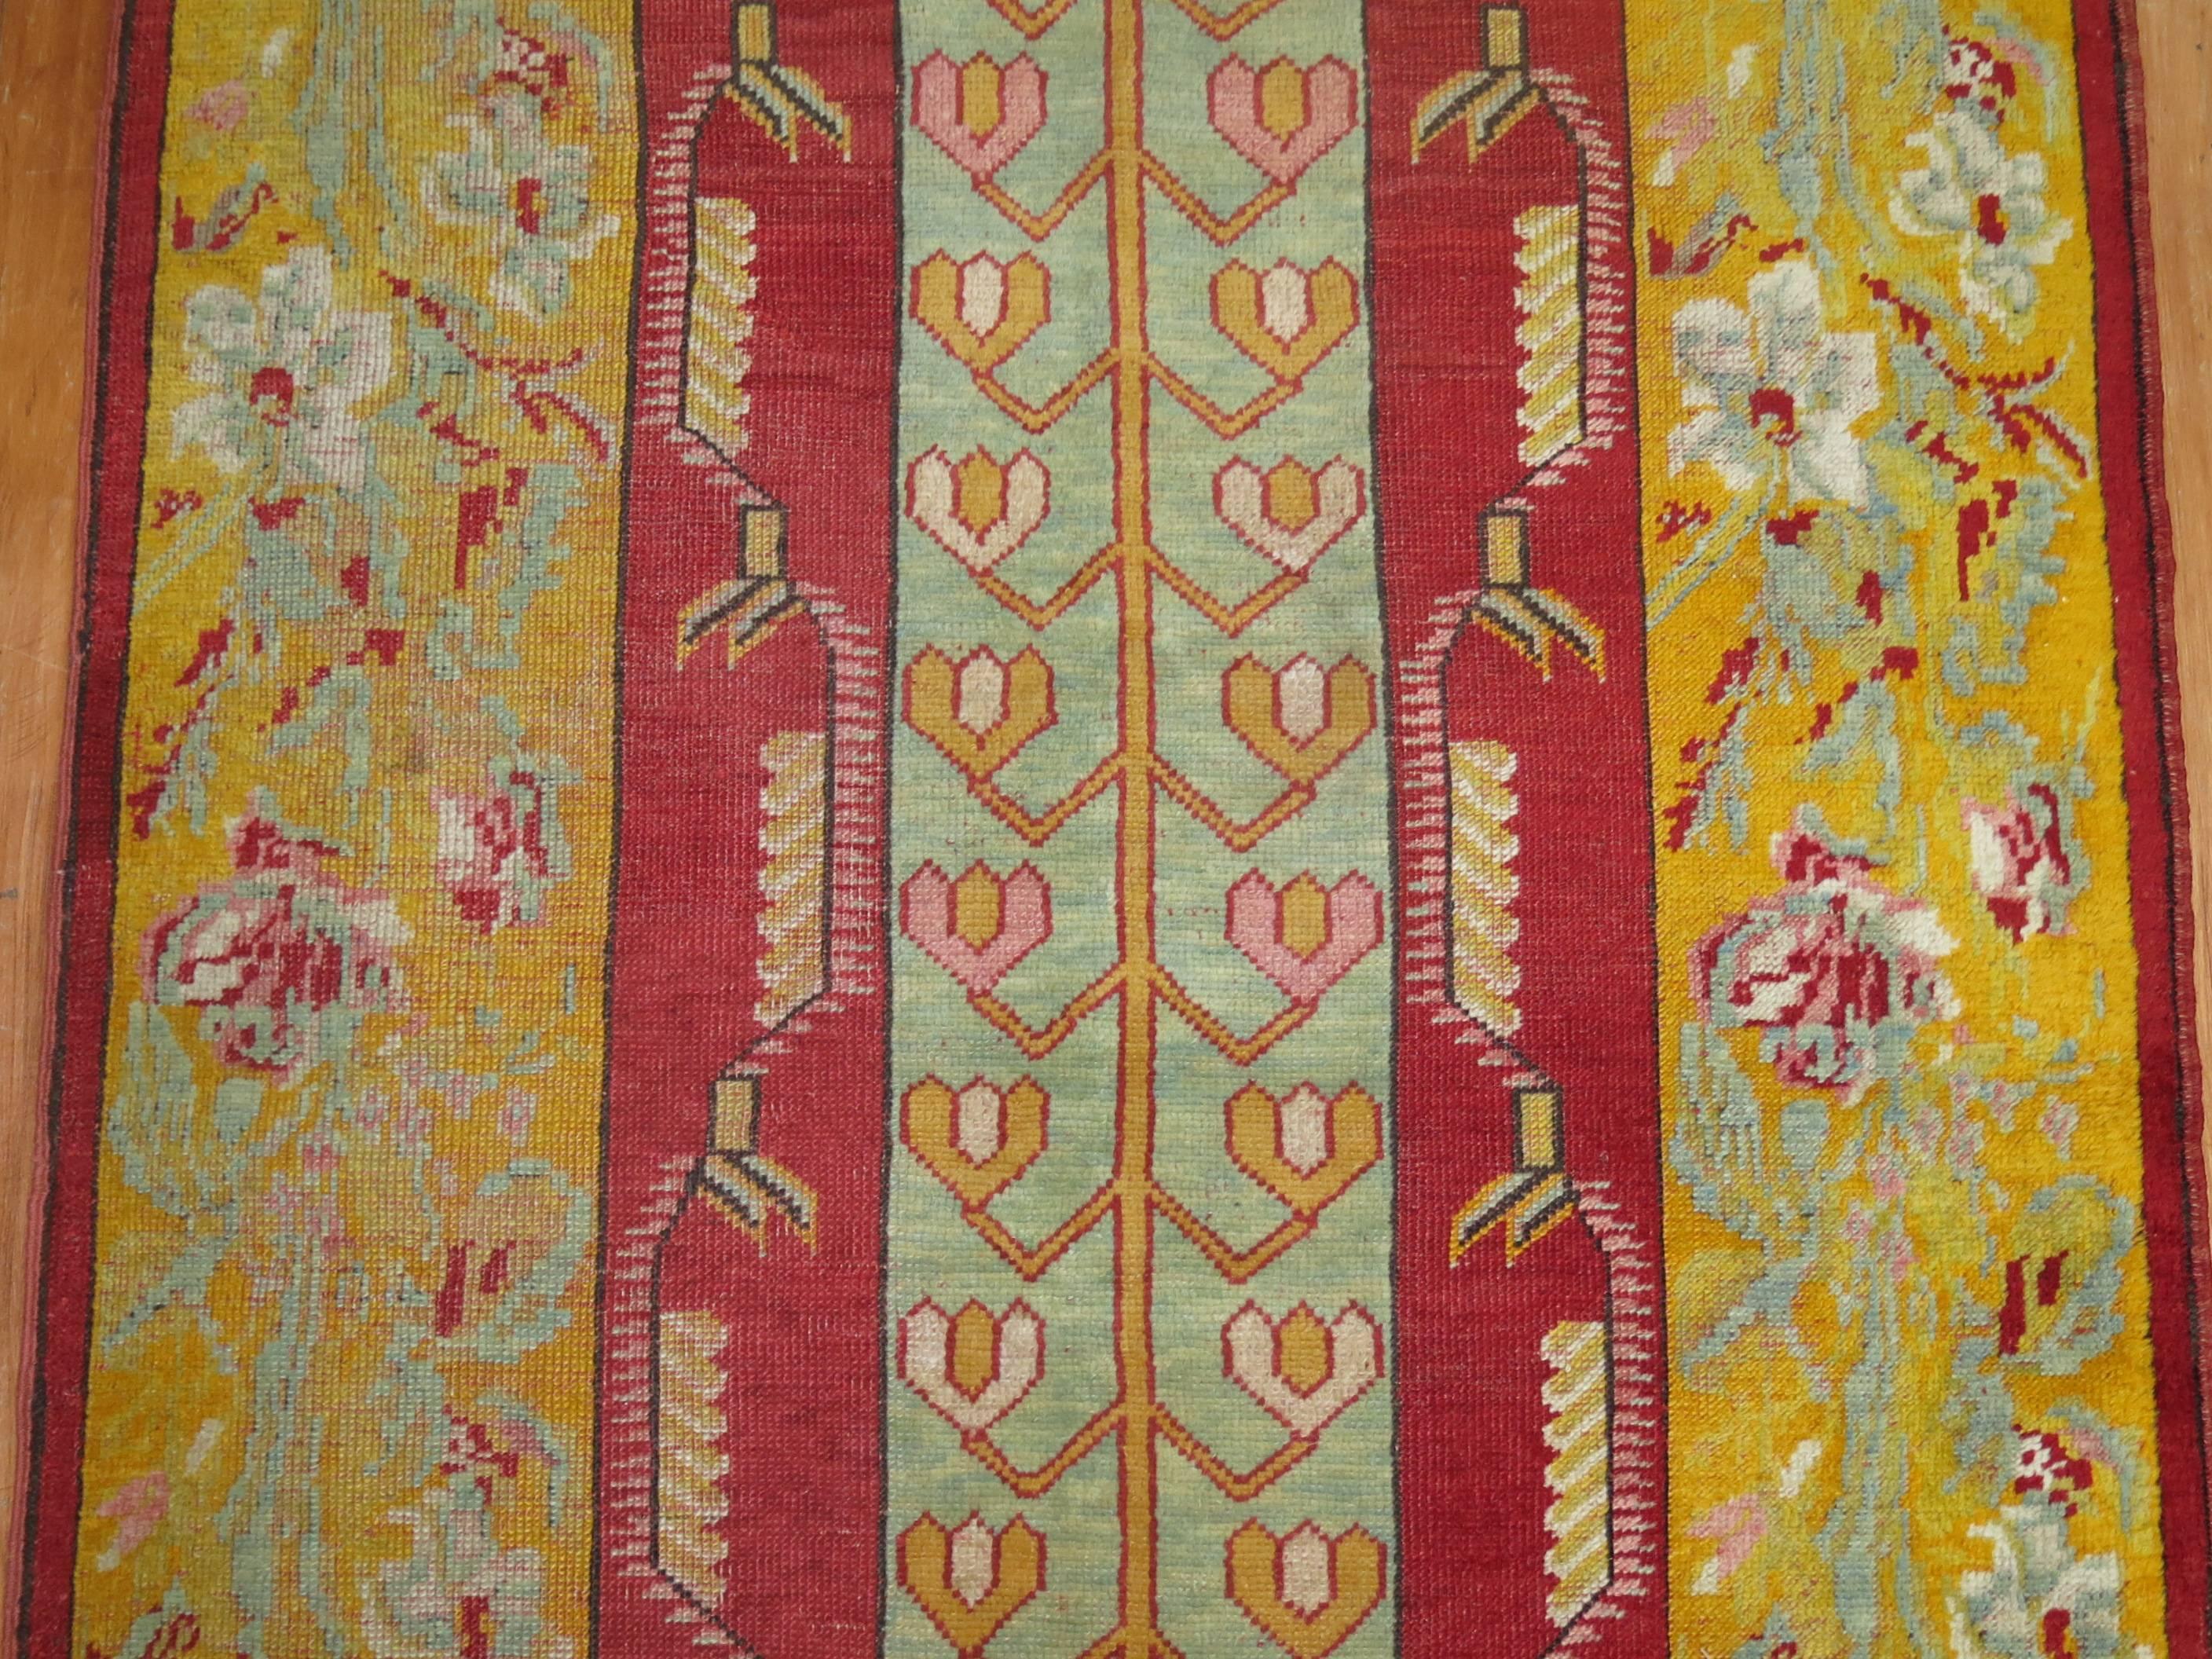 Fine quality bright Turkish runner with an elegant vertical floral motif. Bright red, powder blue, yellow accents,

circa 1920, measures: 3'5